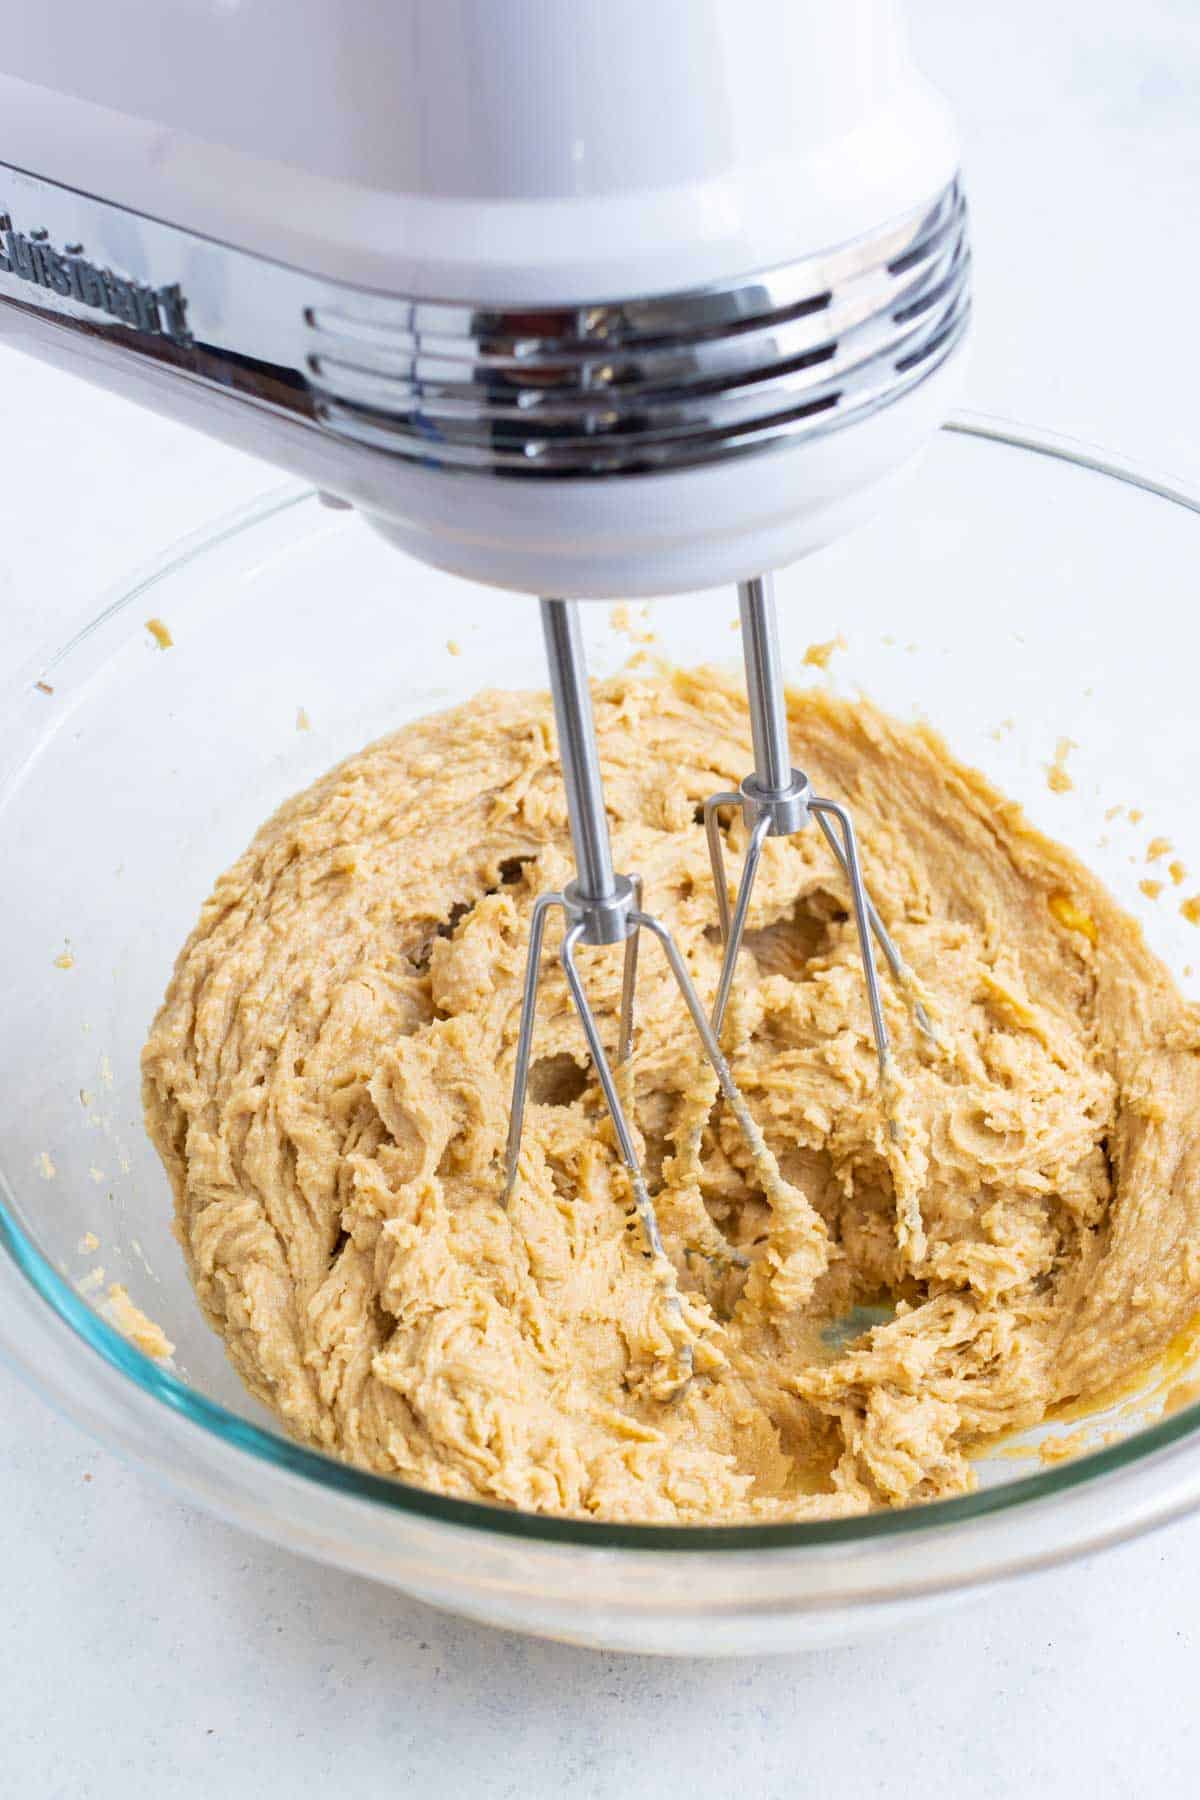 Peanut butter, sugars, and wet ingredients are beaten with a hand mixer.